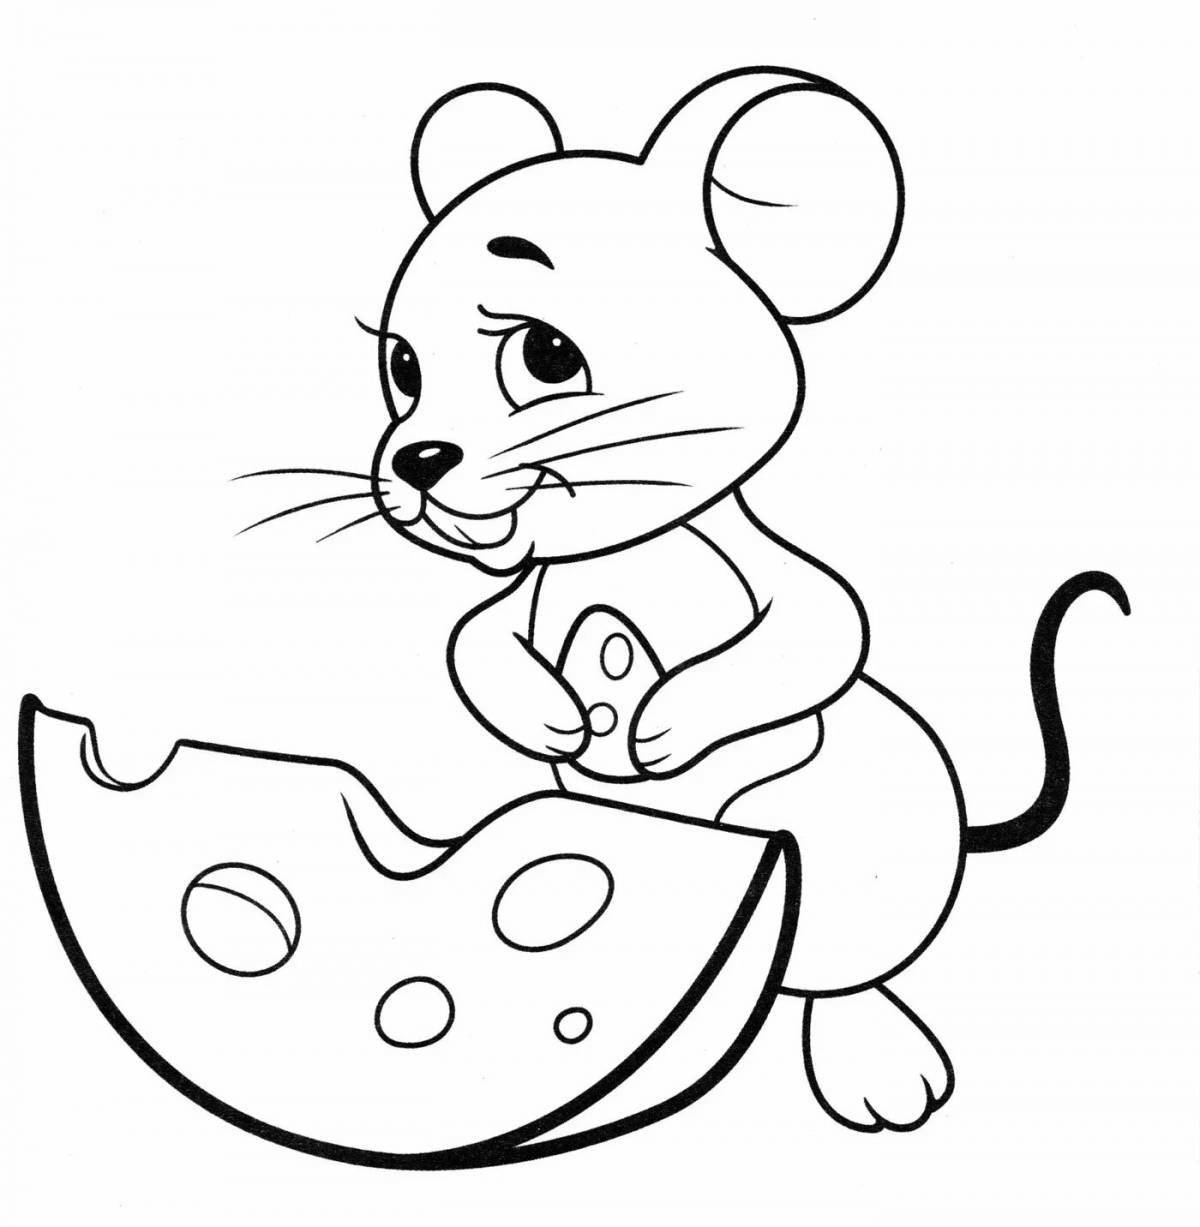 Coloring cute mouse